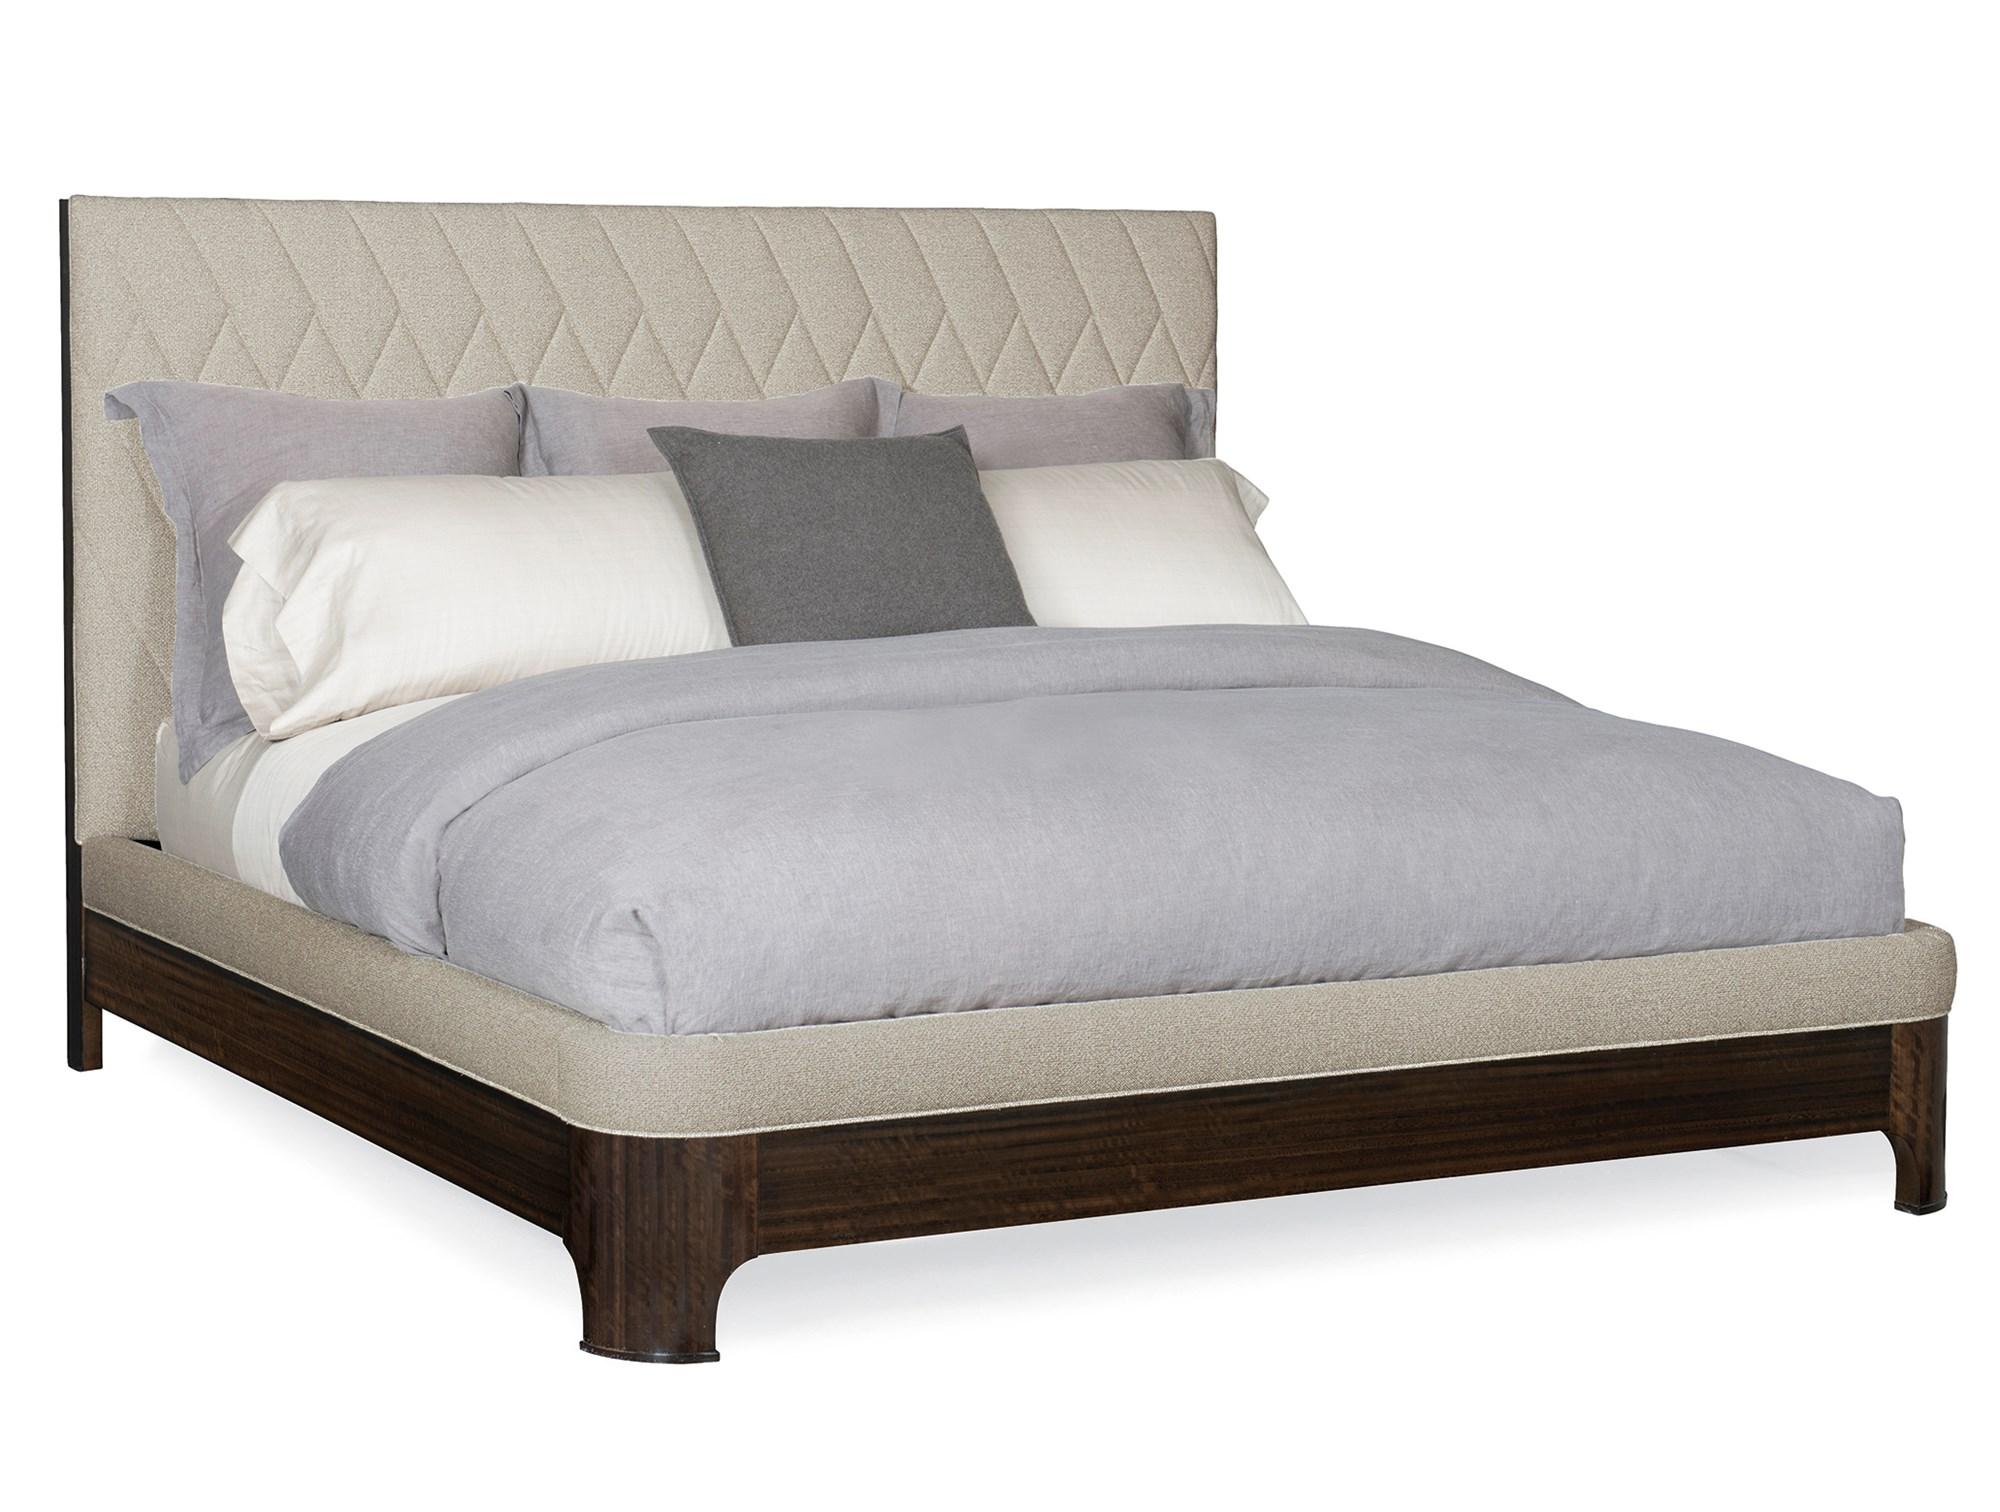 

    
Neutral Tweed Upholstered Headboard Queen MODERNE BED by Caracole
